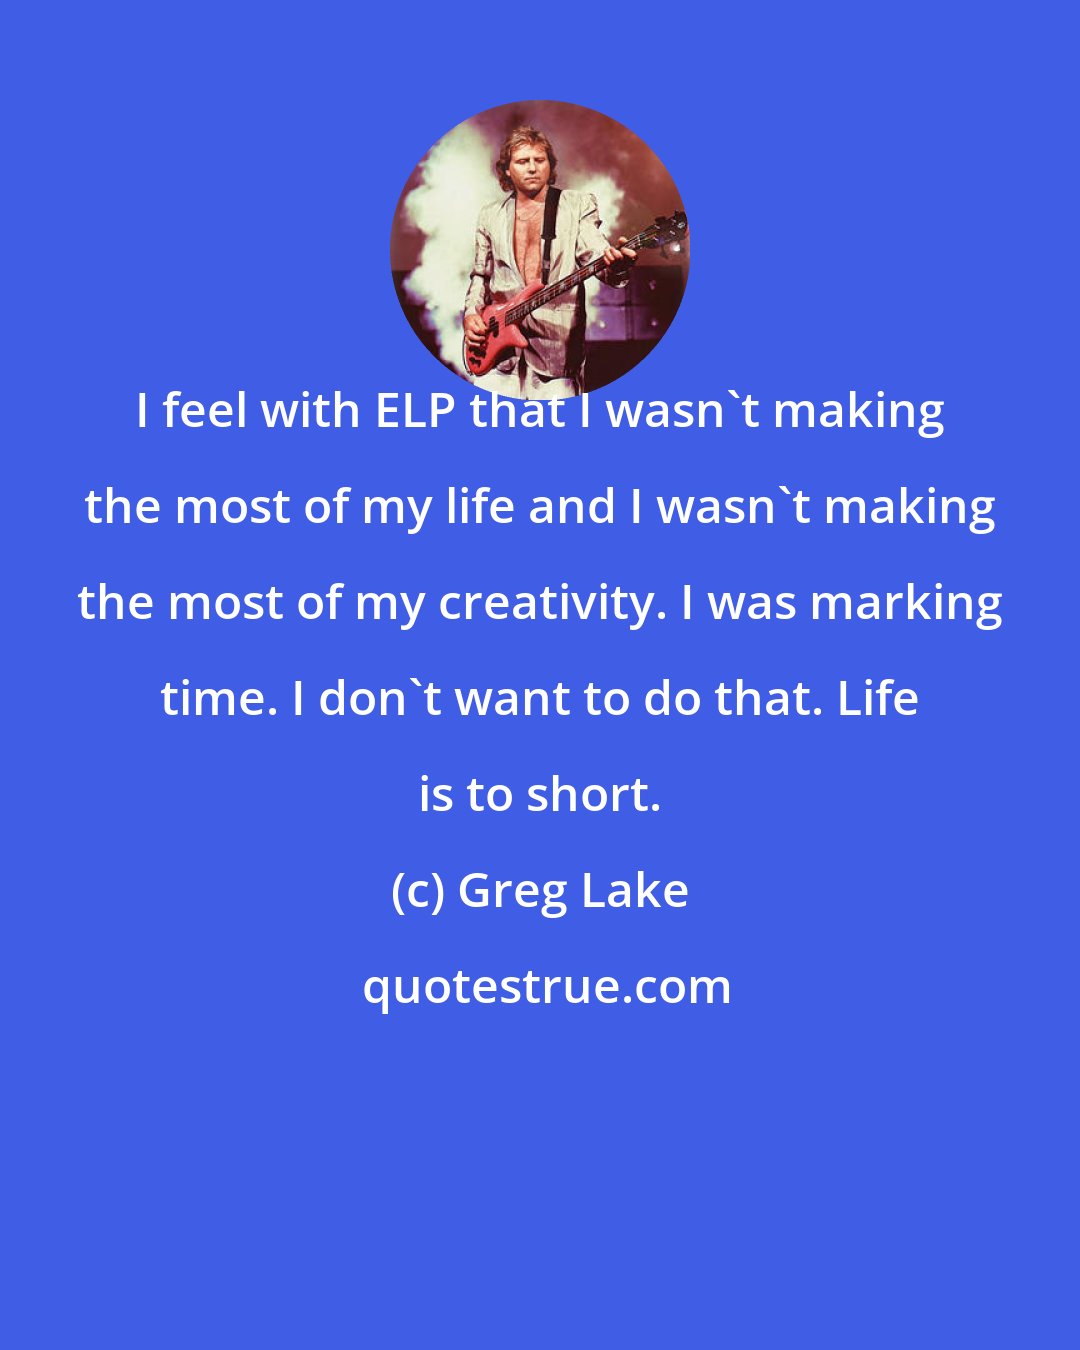 Greg Lake: I feel with ELP that I wasn't making the most of my life and I wasn't making the most of my creativity. I was marking time. I don't want to do that. Life is to short.